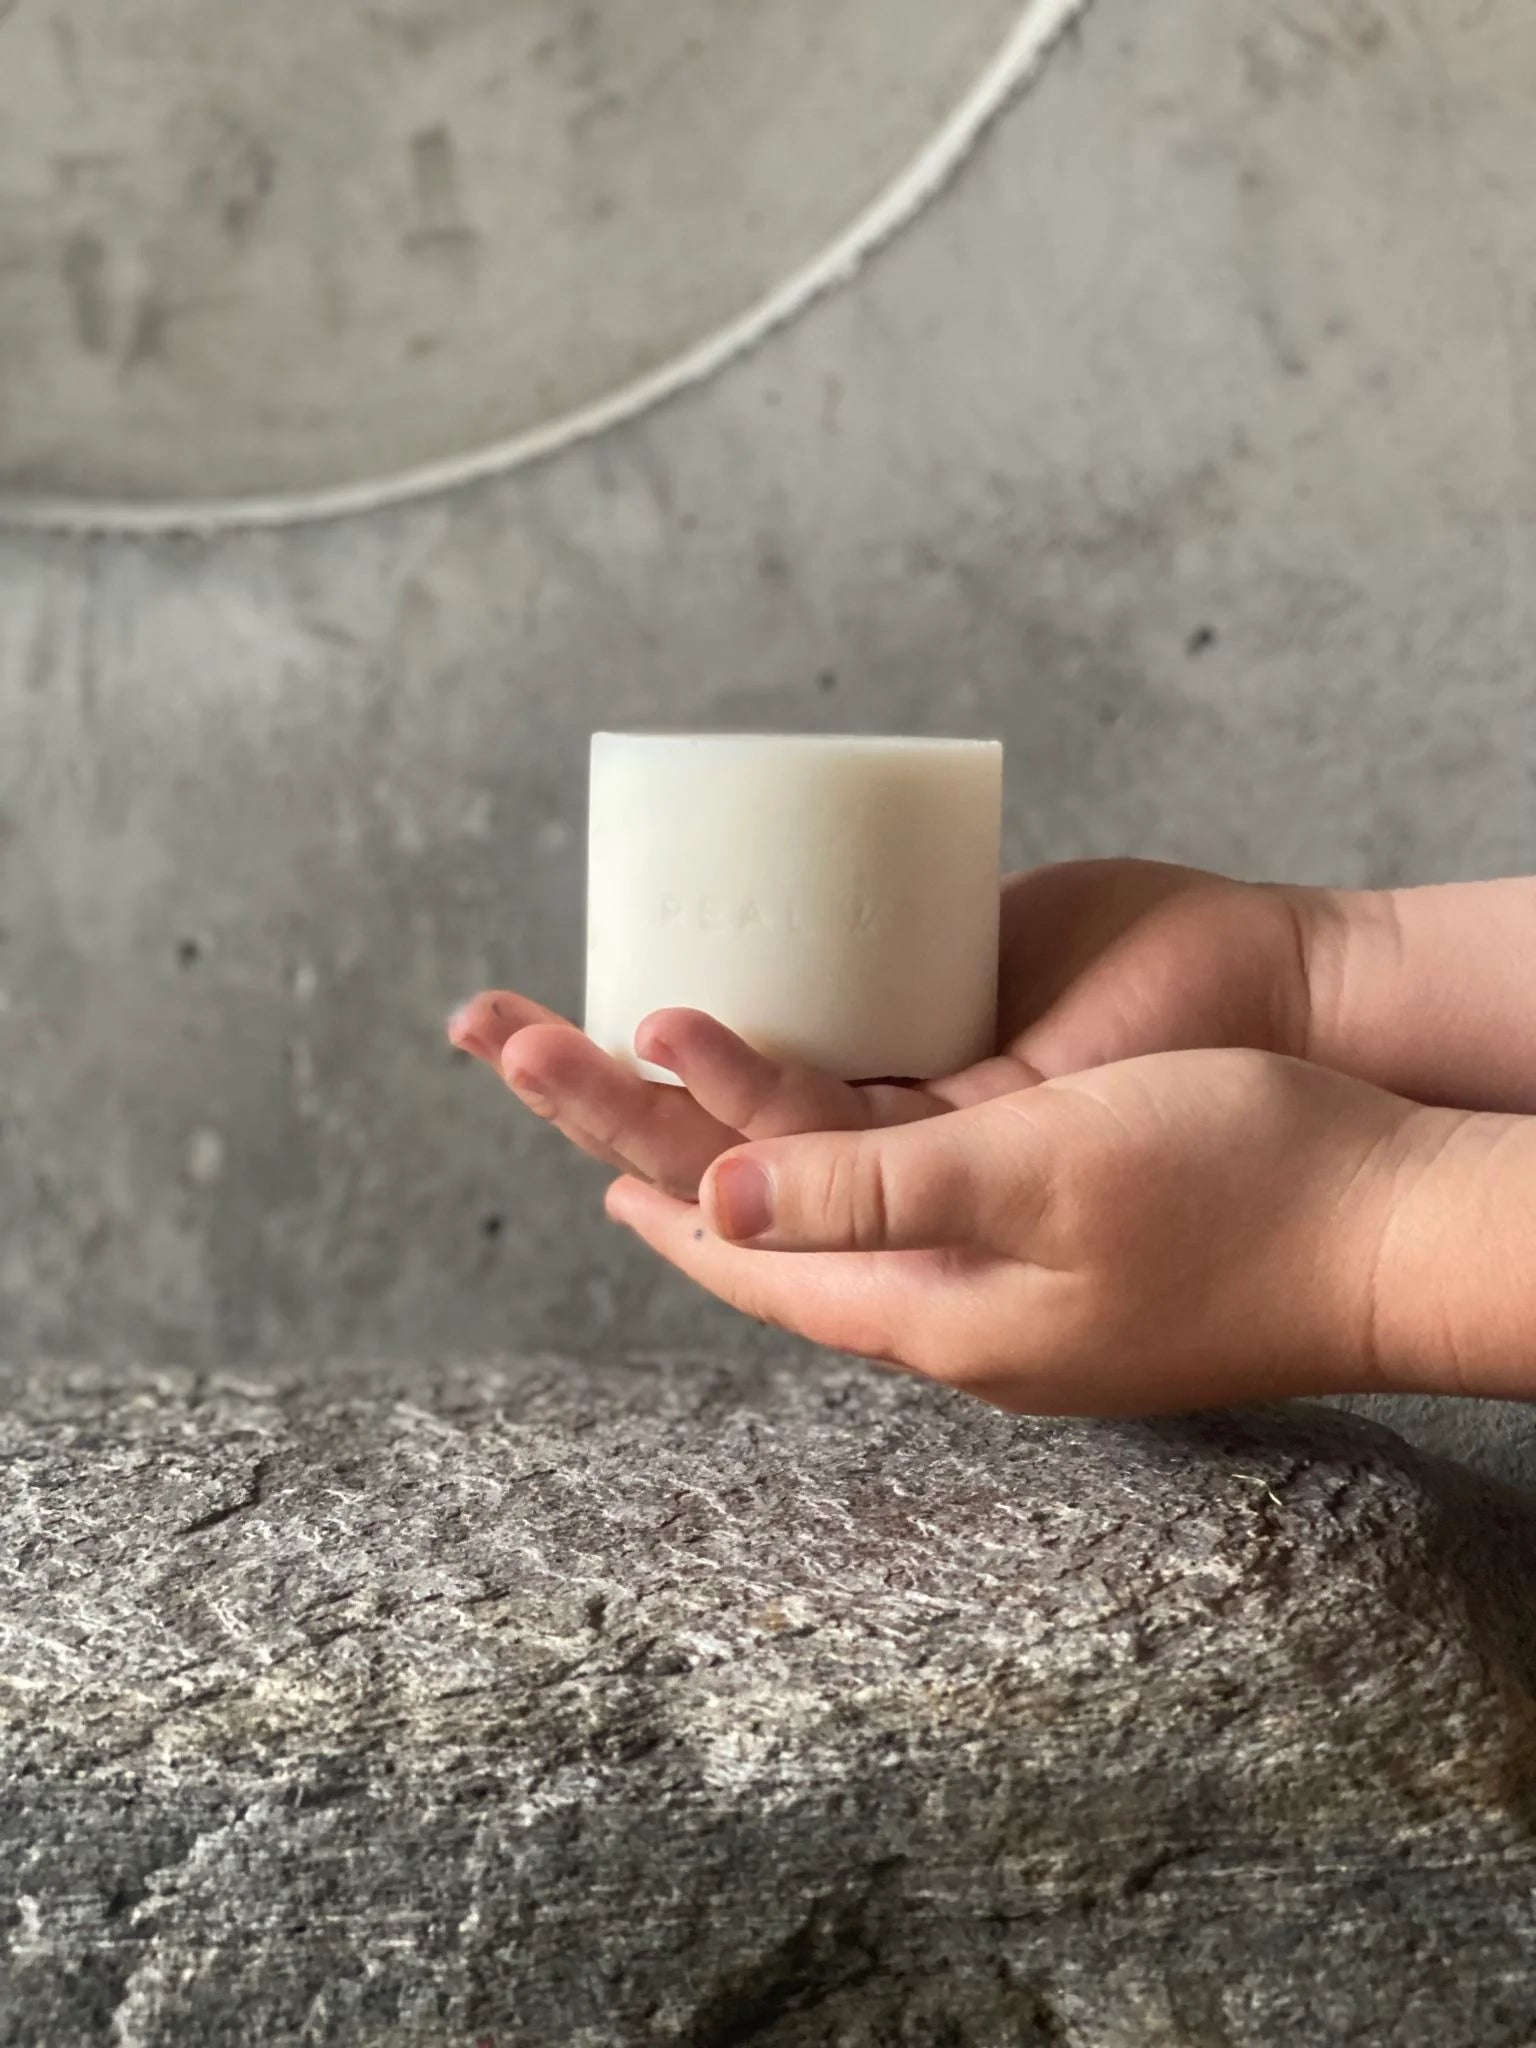 A child's gentle hands cradling a Soap Bar - Mamaku & Lavender by Real World, scented with lavender essential oils, set against a textured gray background.